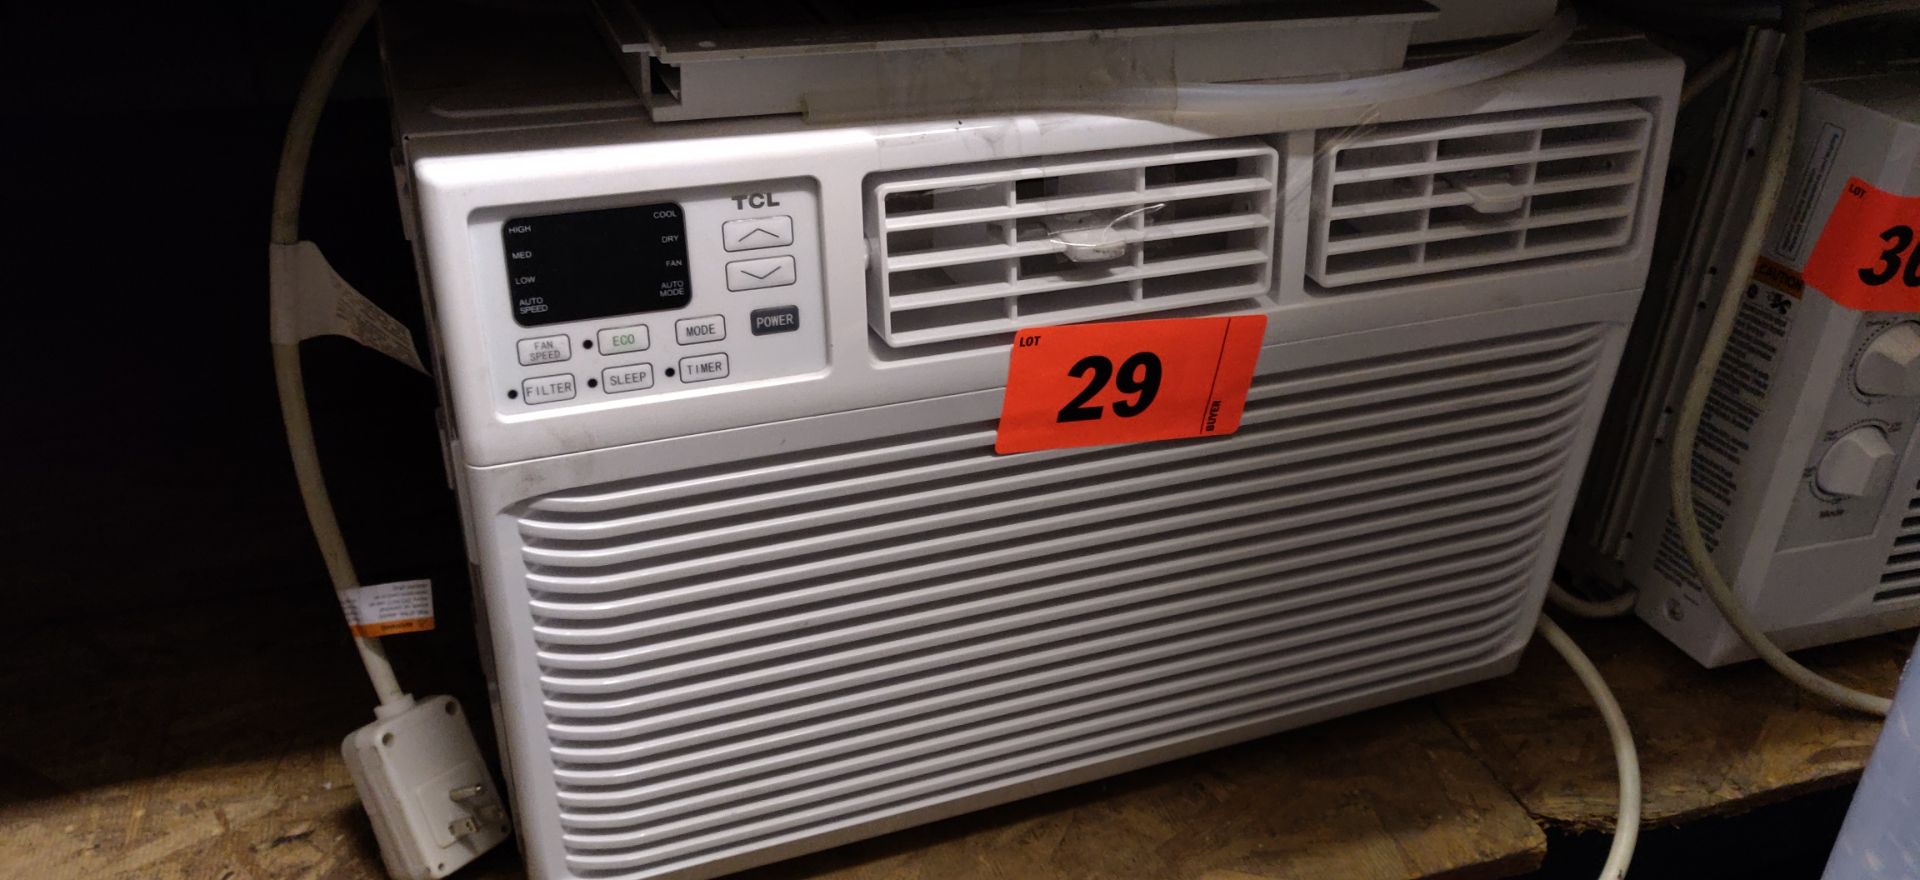 TCL WINDOW AIR CONDITIONER